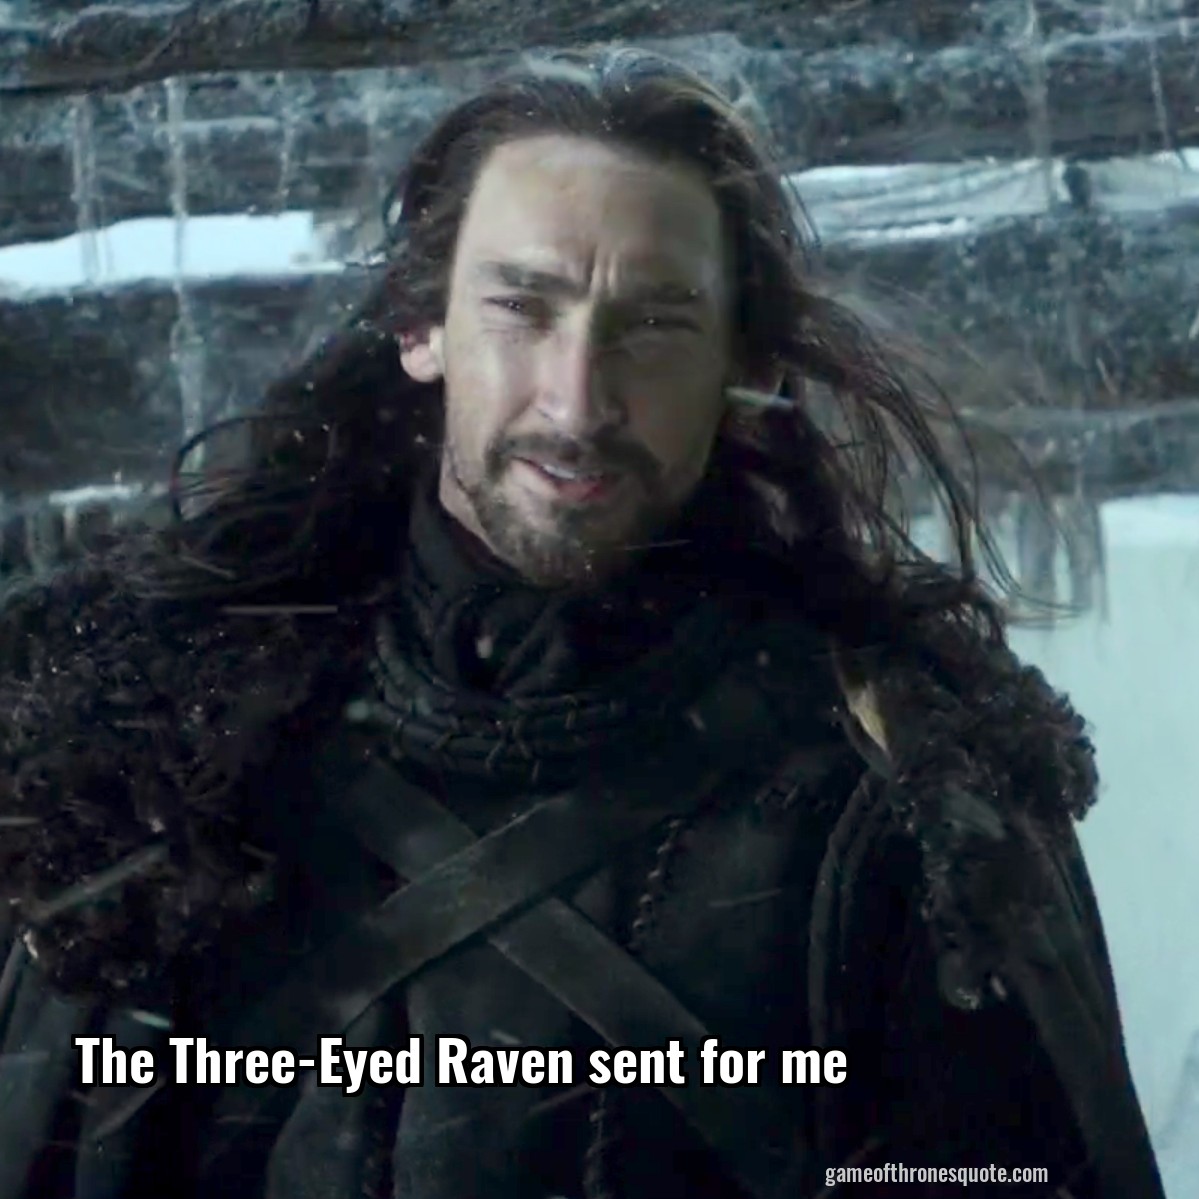 The Three-Eyed Raven sent for me